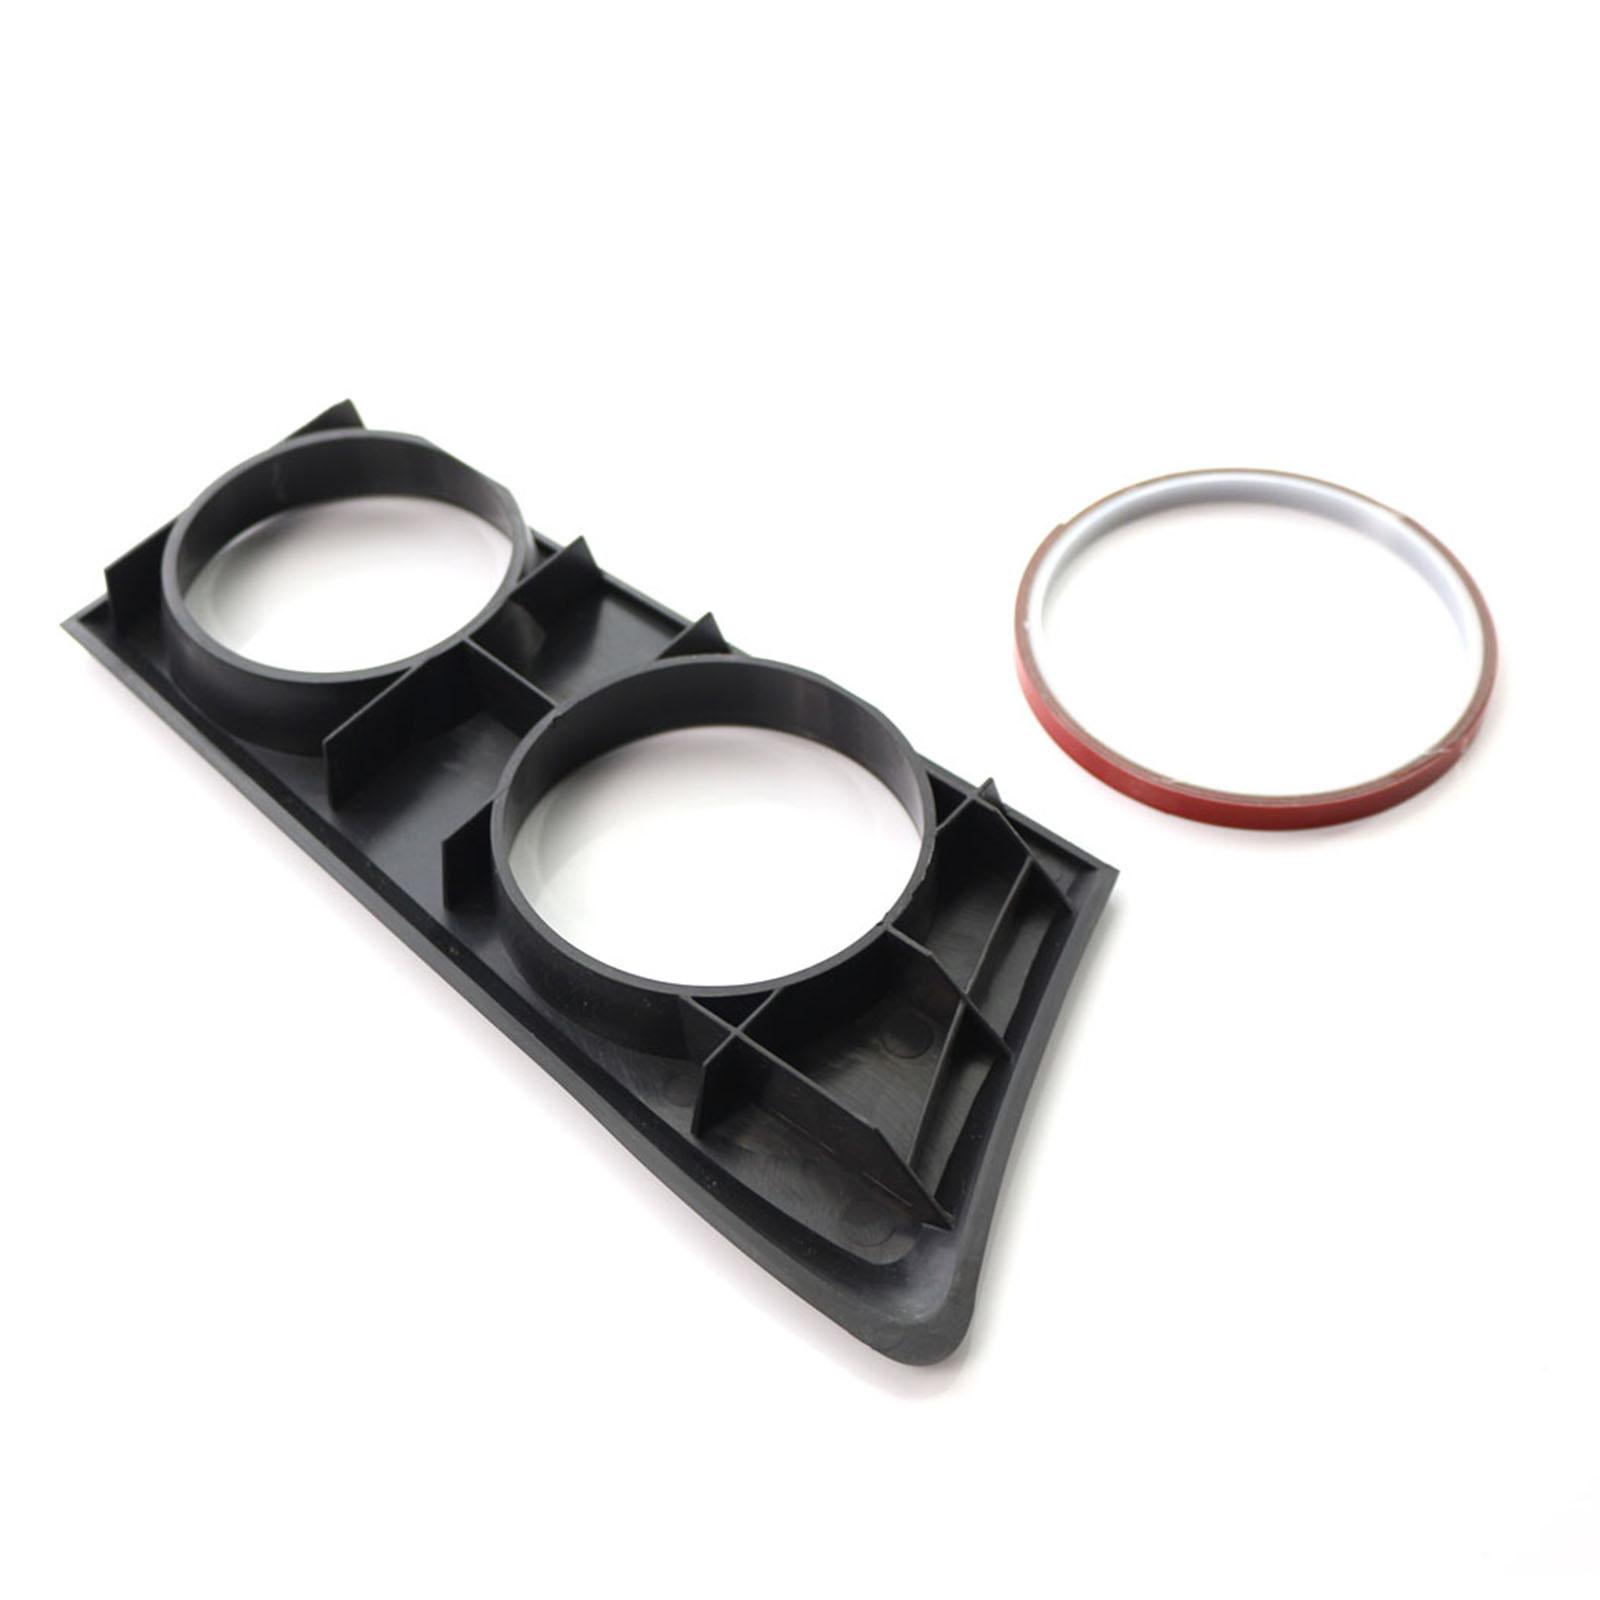 Black Car Front Water Cup Holder Fit for BMW 1 Series E87 04 11 Bright